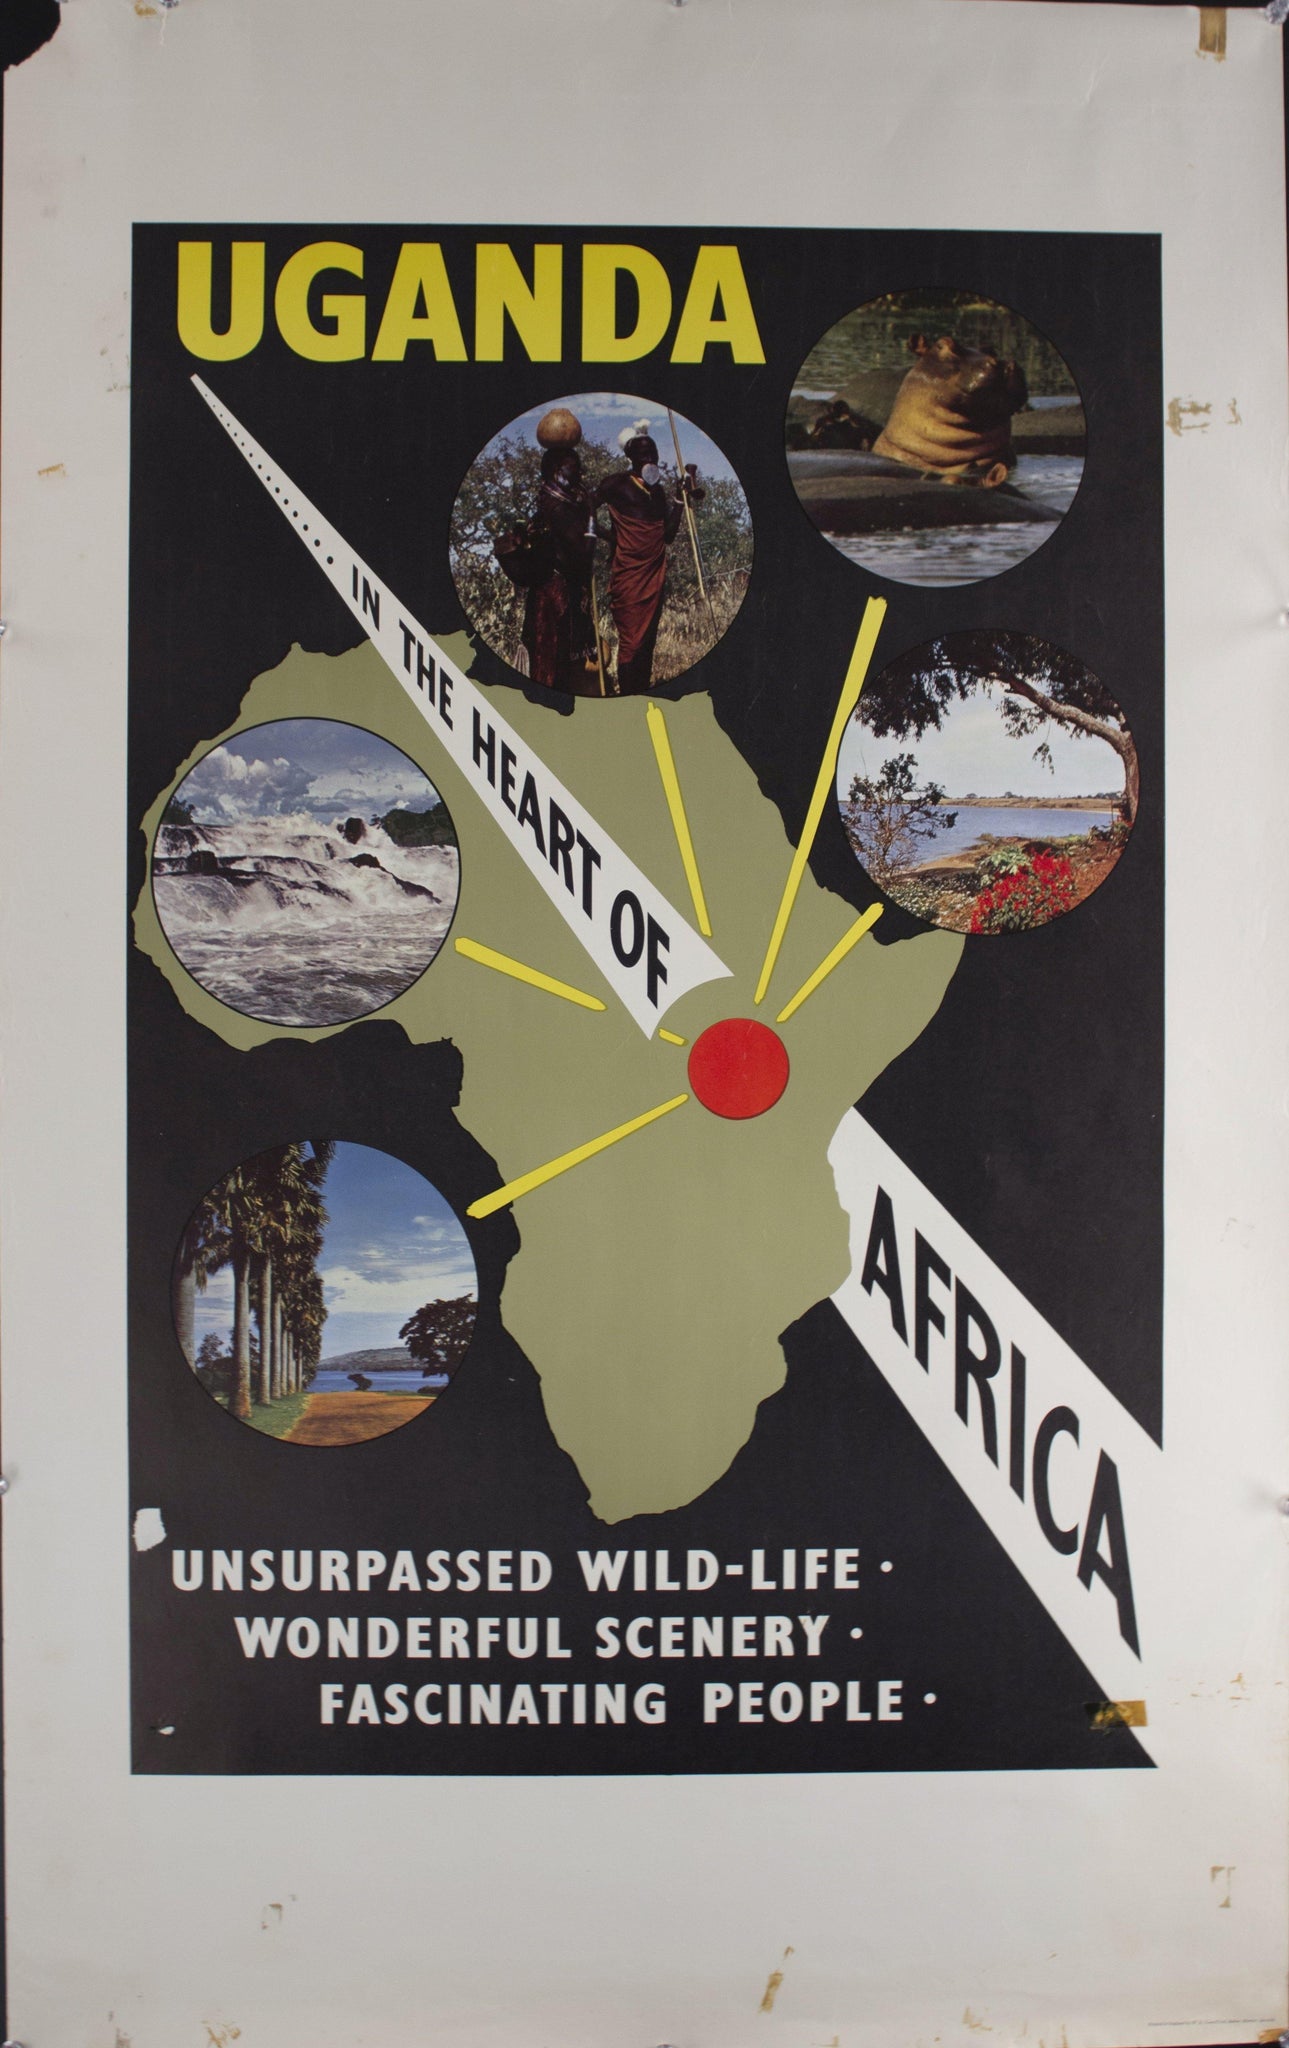 Uganda in the Heart of Africa | Unsurpassed Wild-Life Wonderful Scenery Fascinating People - Golden Age Posters